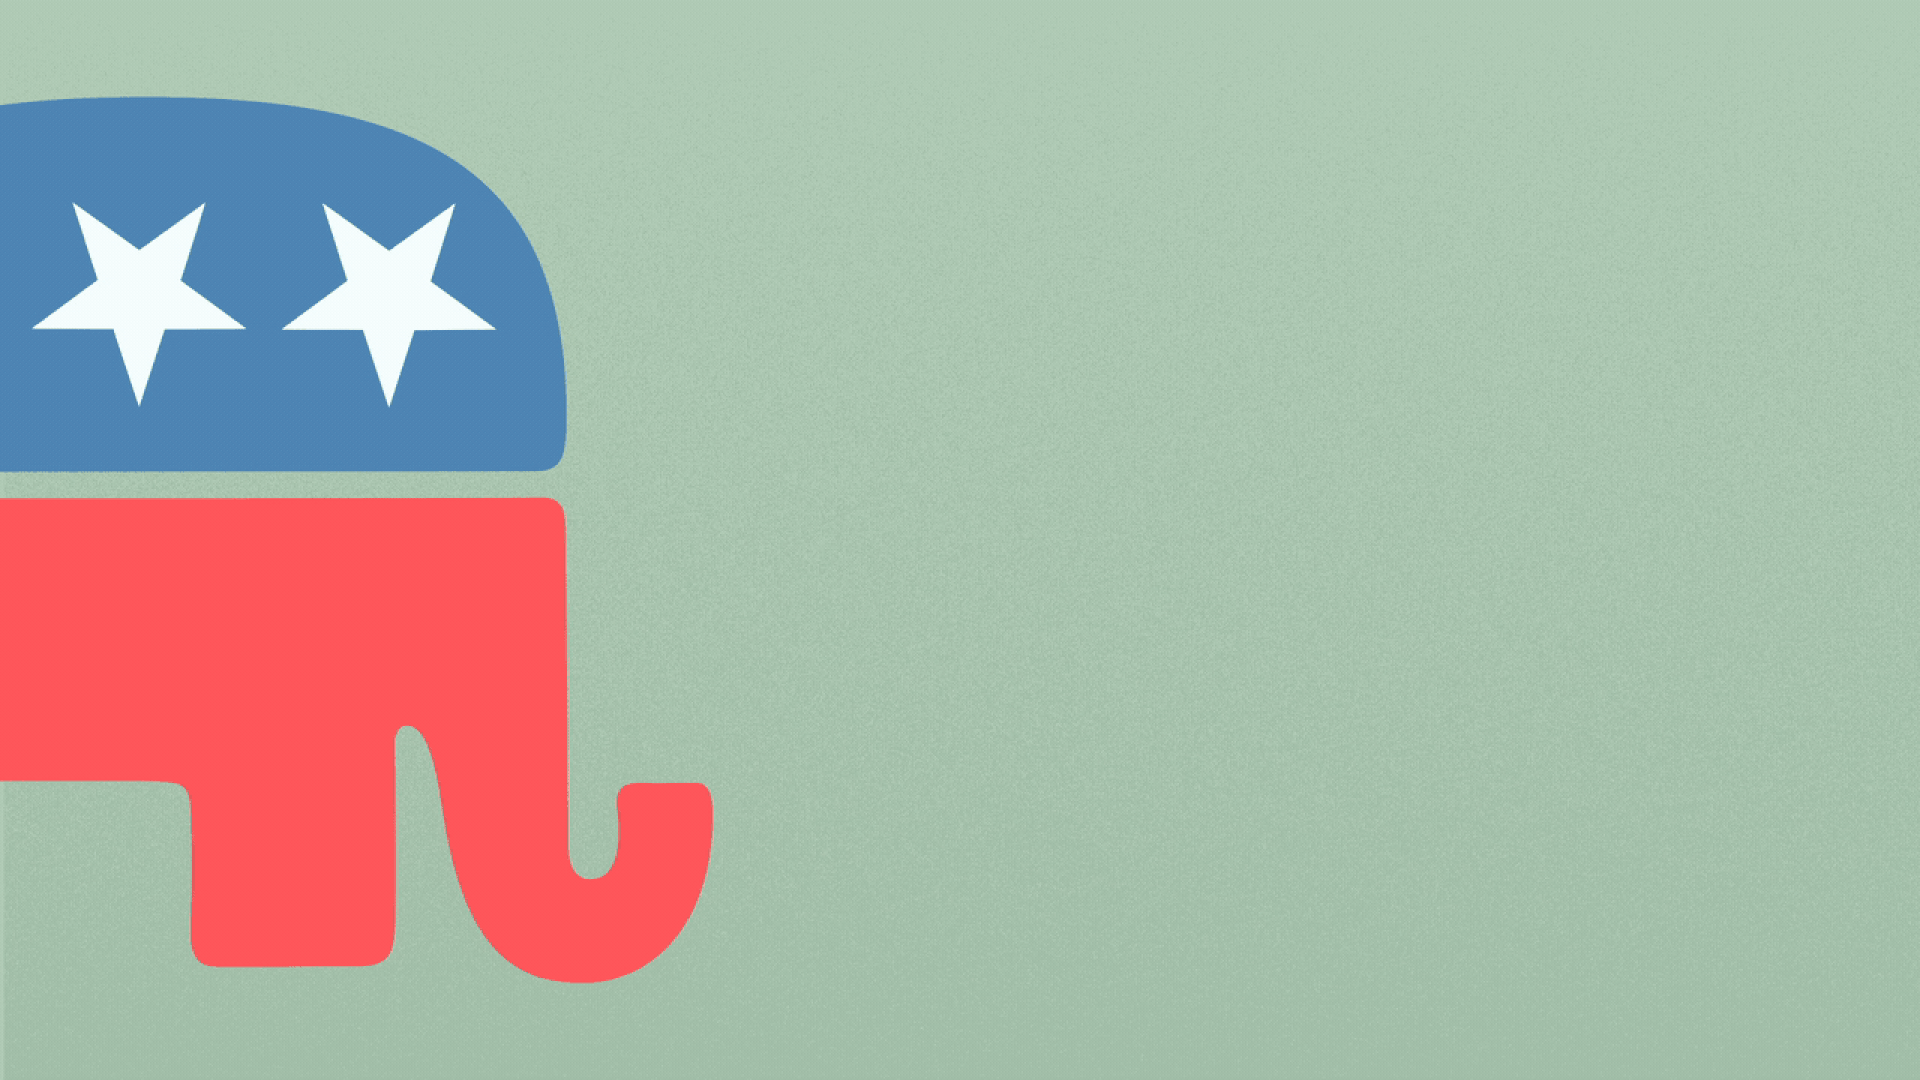 Illustration of the Republican elephant logo with a unicorn horn breaking out of its forehead.